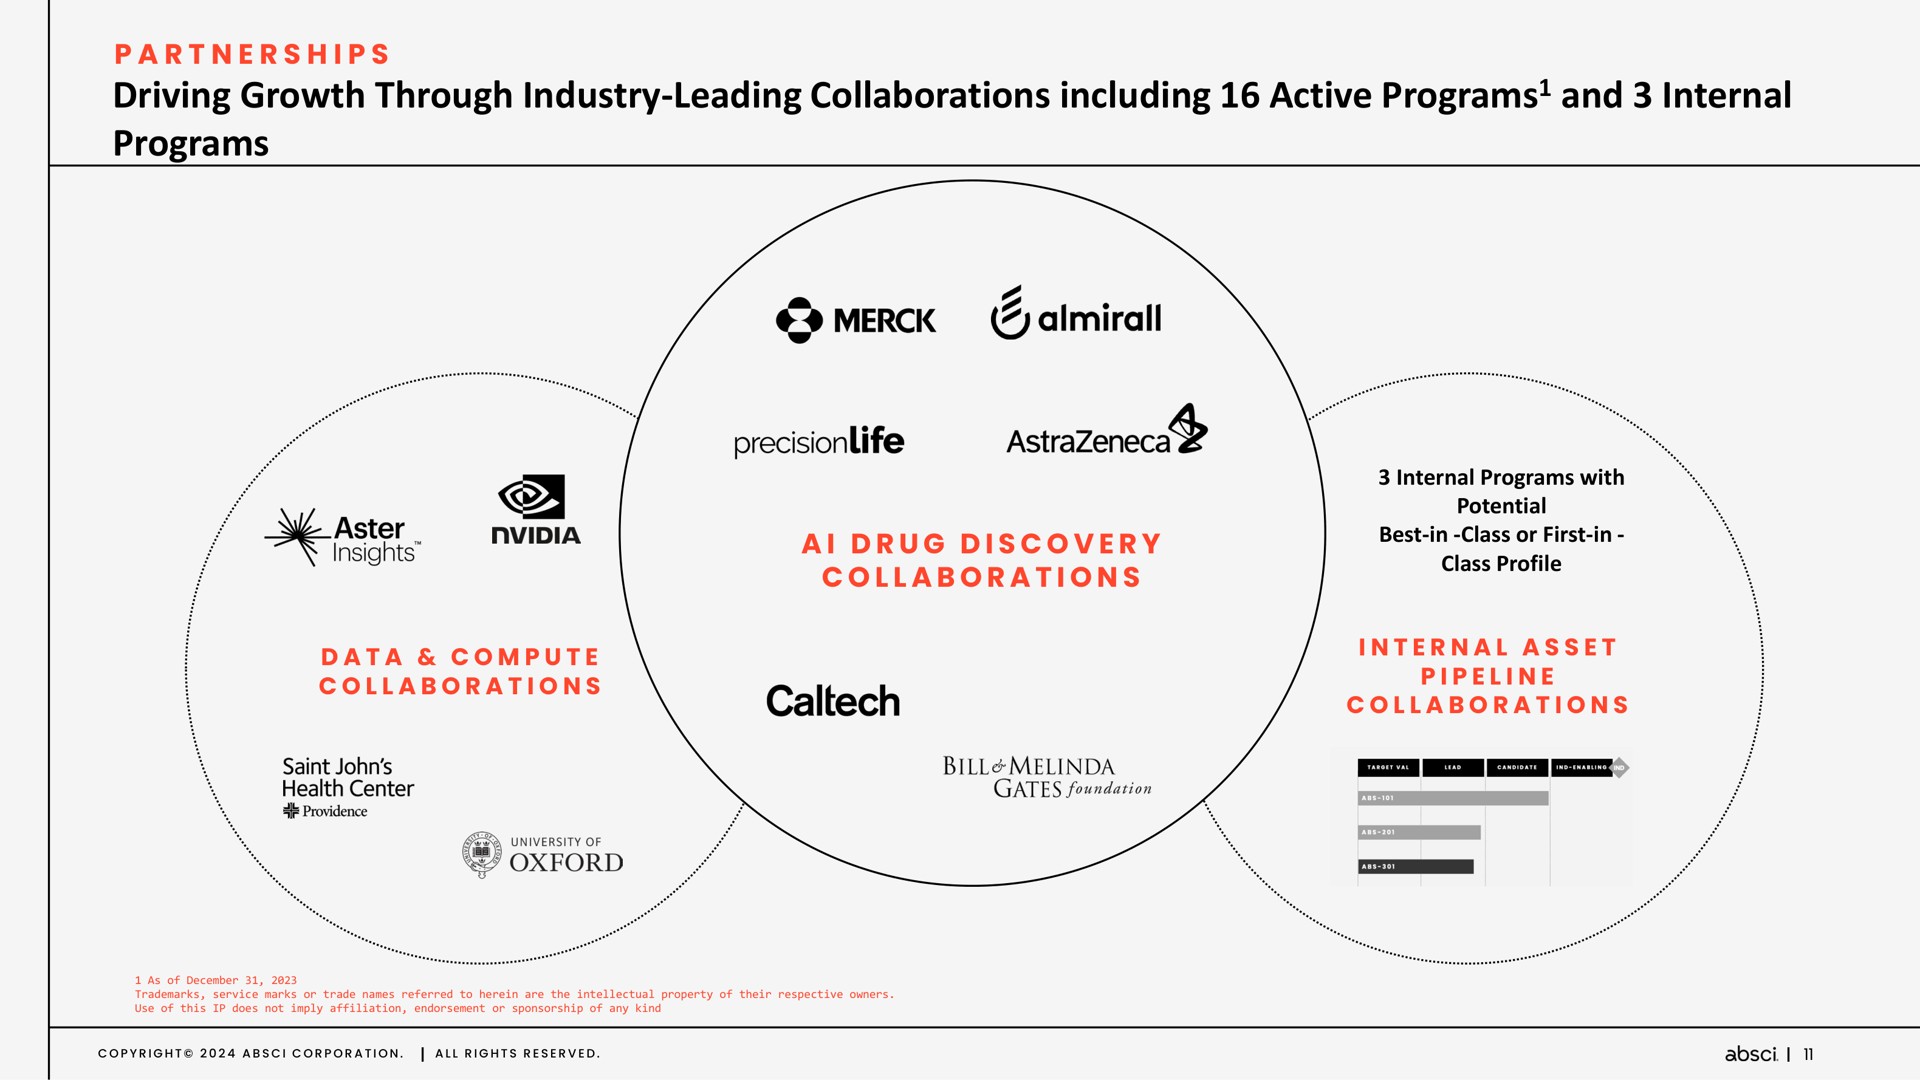 driving growth through industry leading collaborations including active programs and internal programs partnerships | Absci